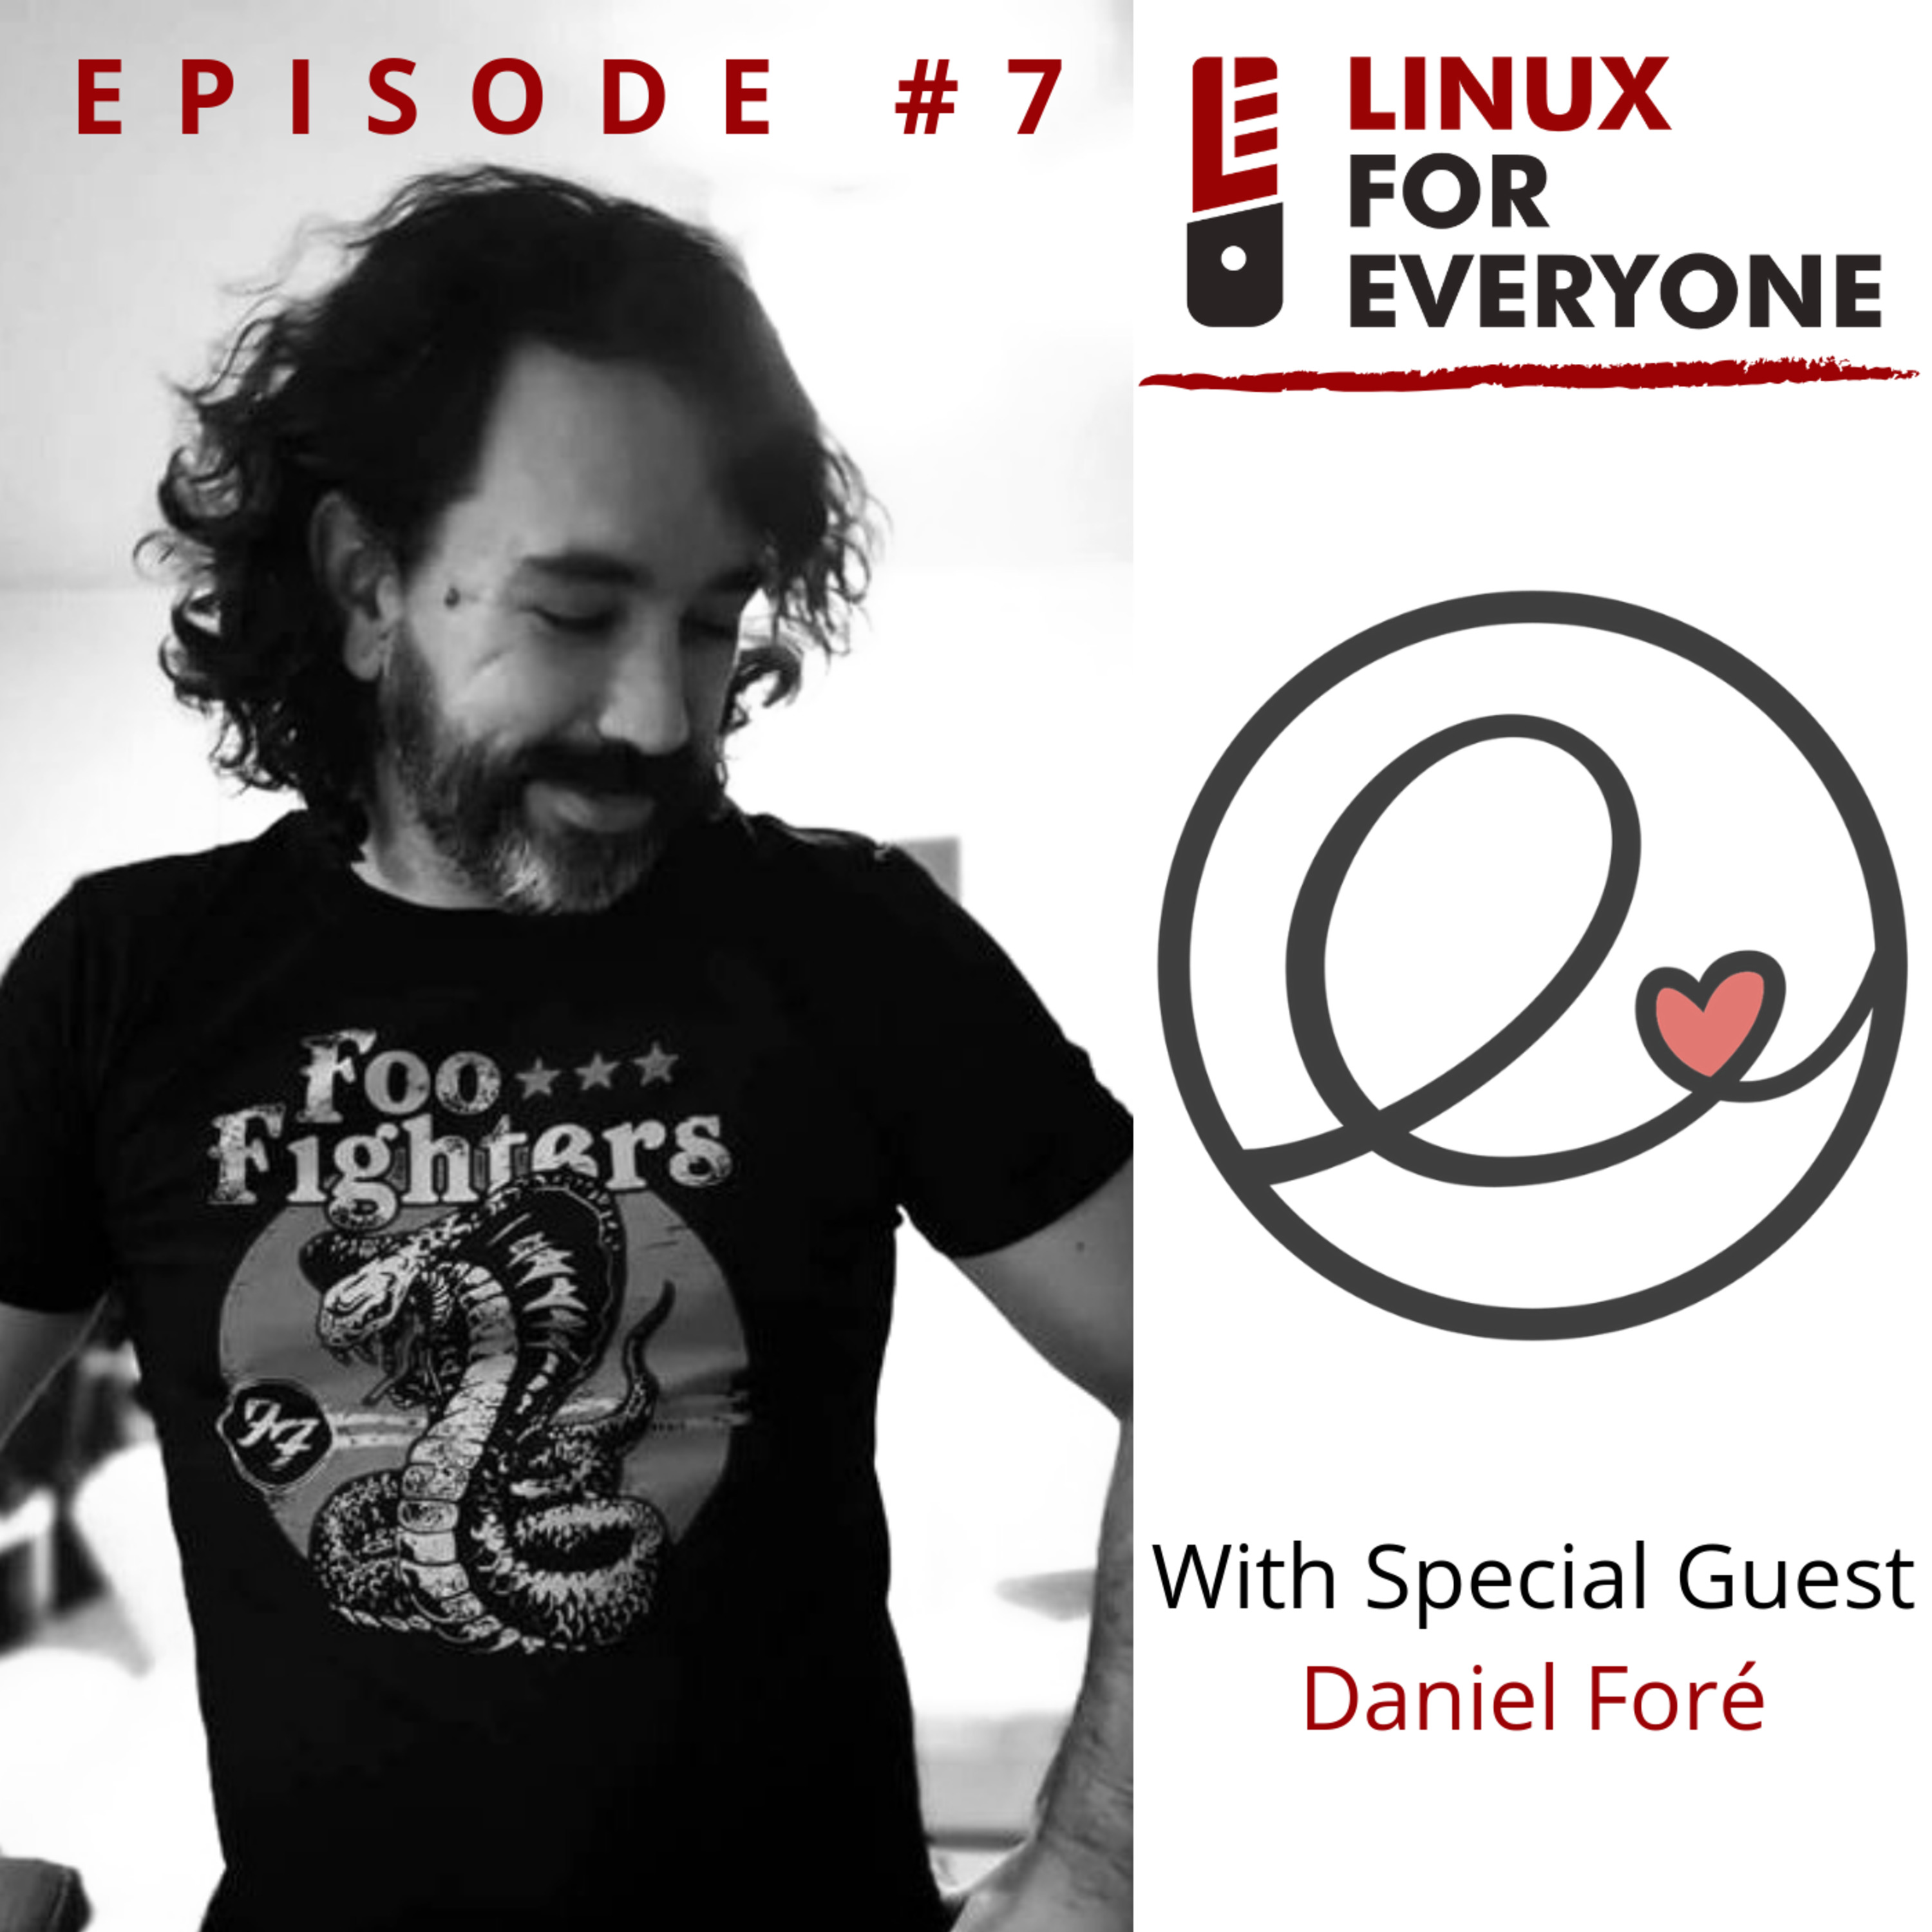 Episode 7: The elementary OS Interview